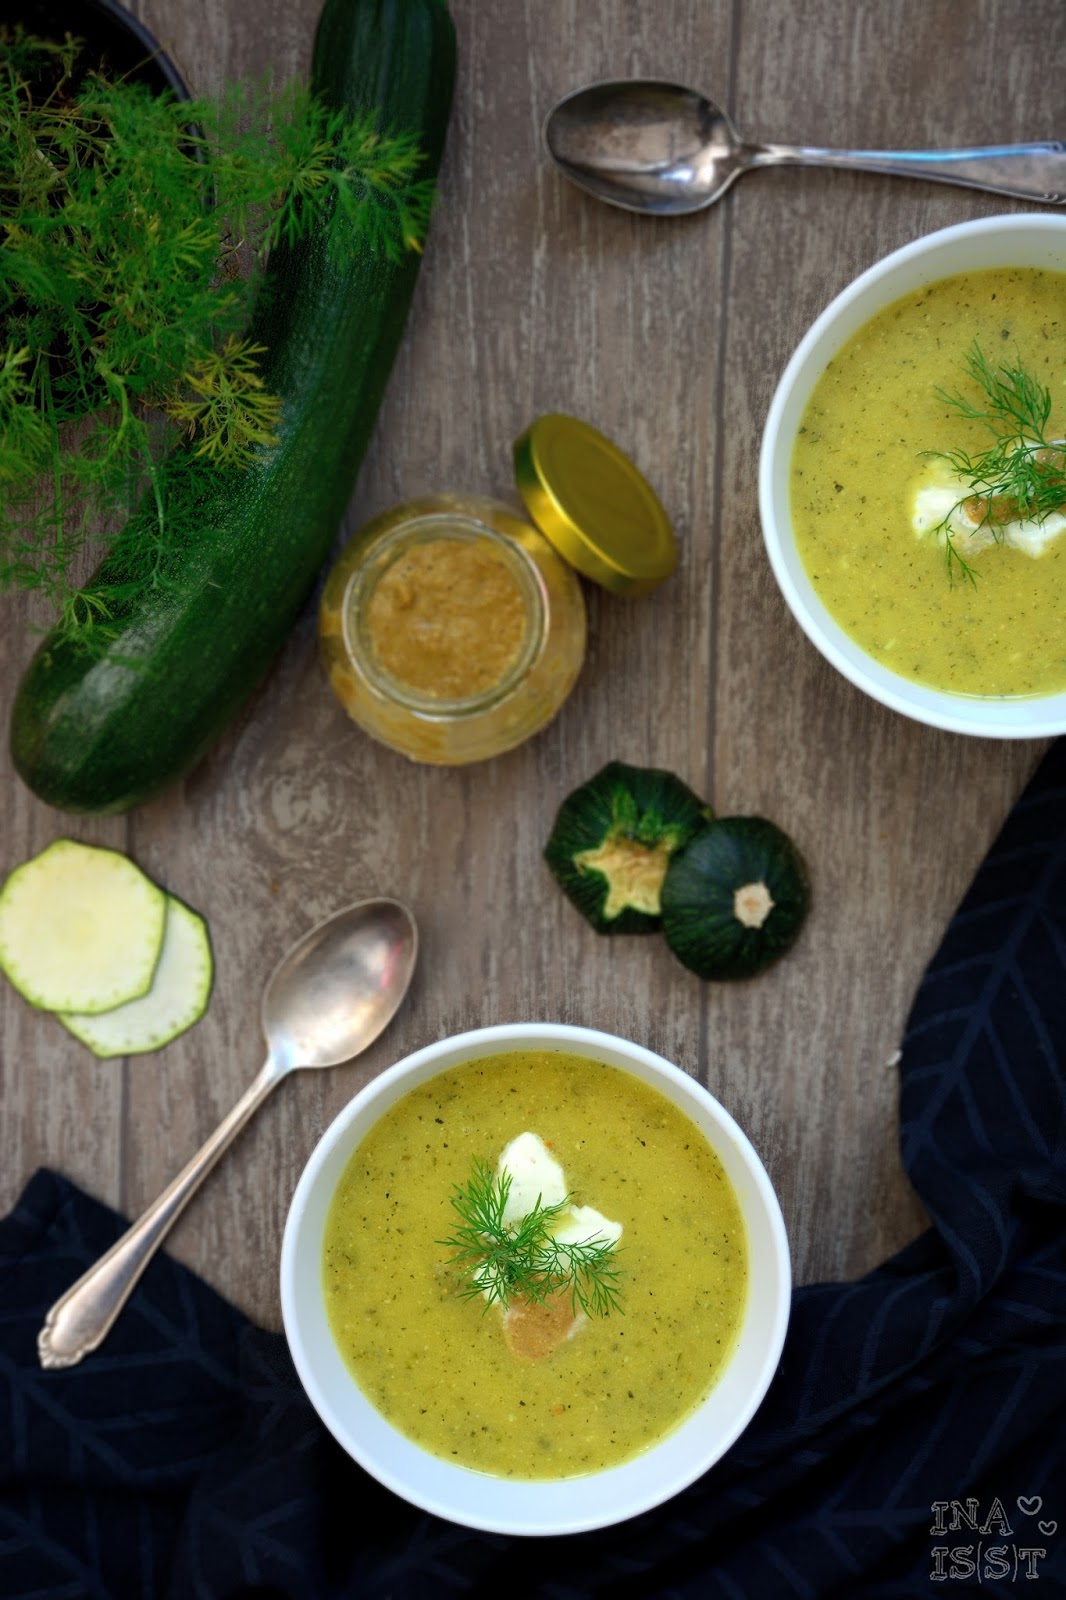 Ina Is(s)t: Zucchini-Senf-Suppe mit Dill / Zucchini soup with mustard ...